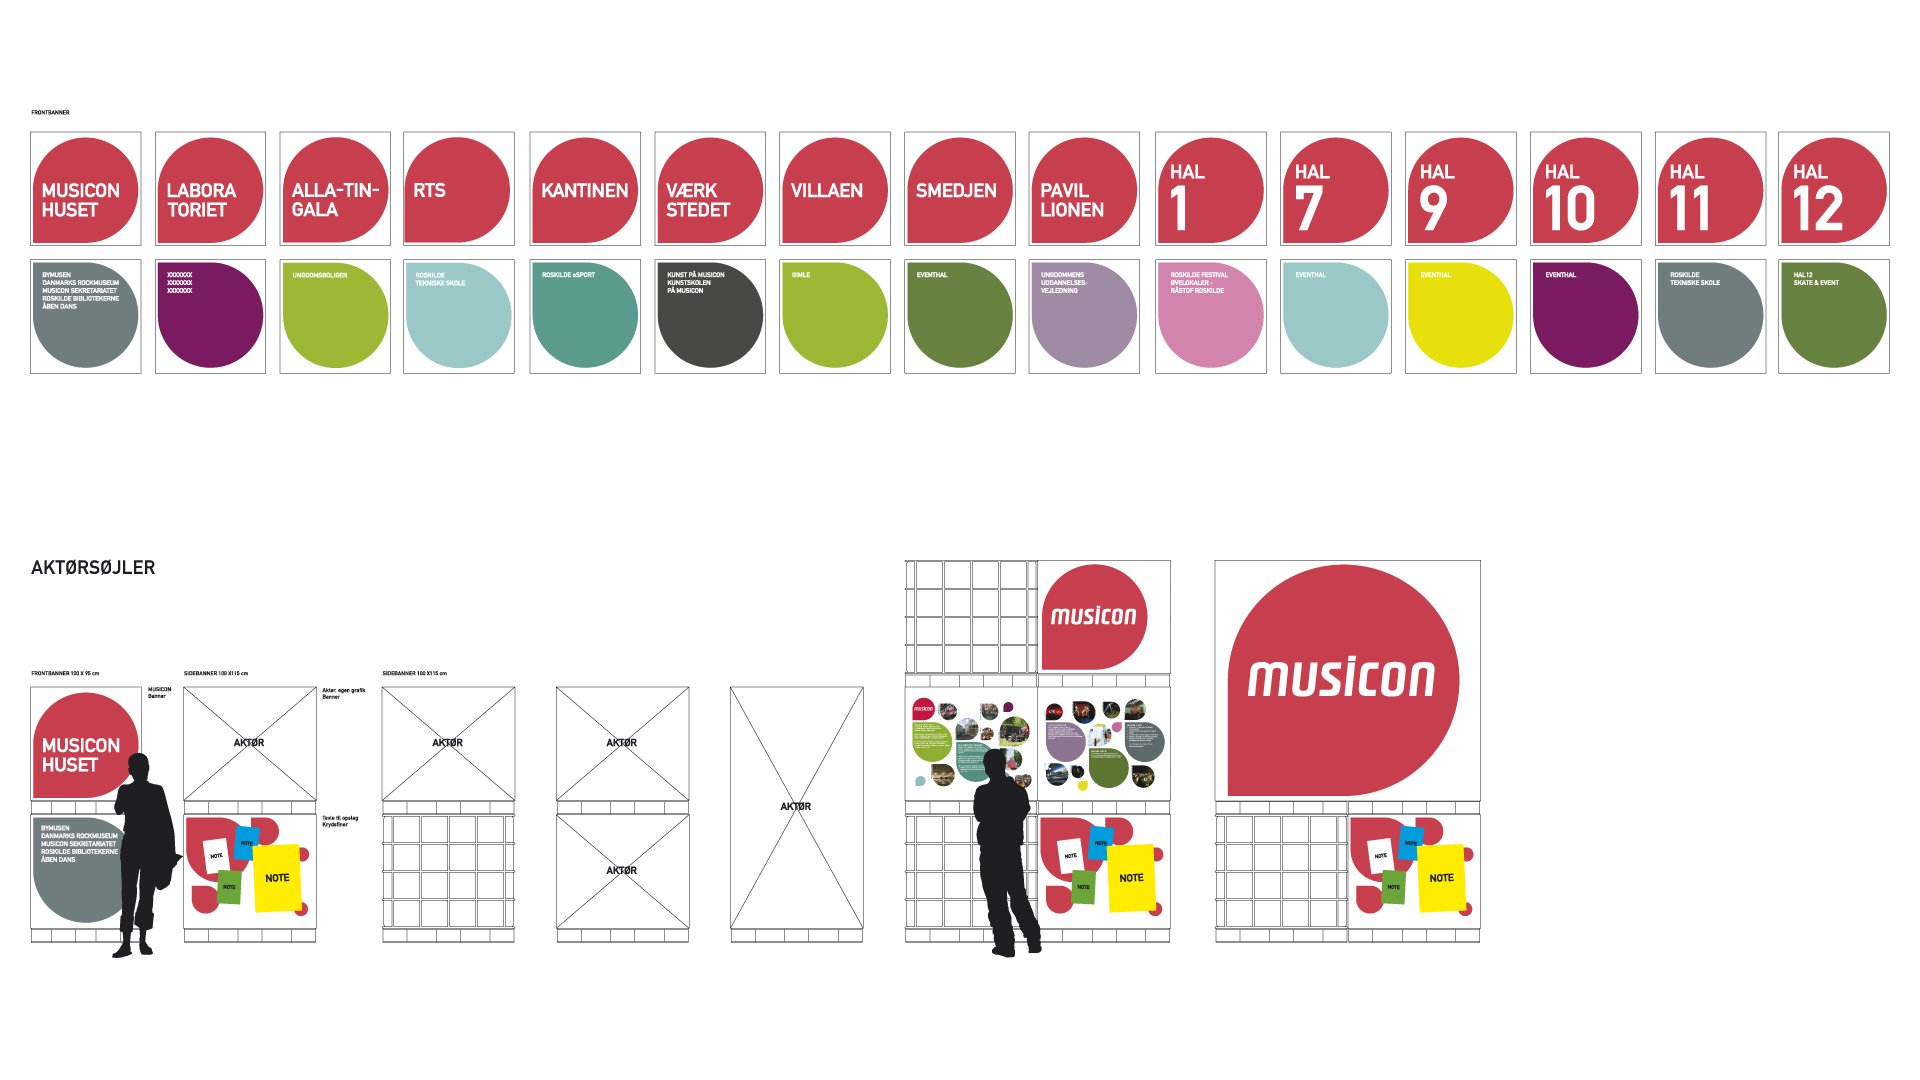 Overview of how to use the Musicon graphics, and what each graphic represents, made by LOOP Associates